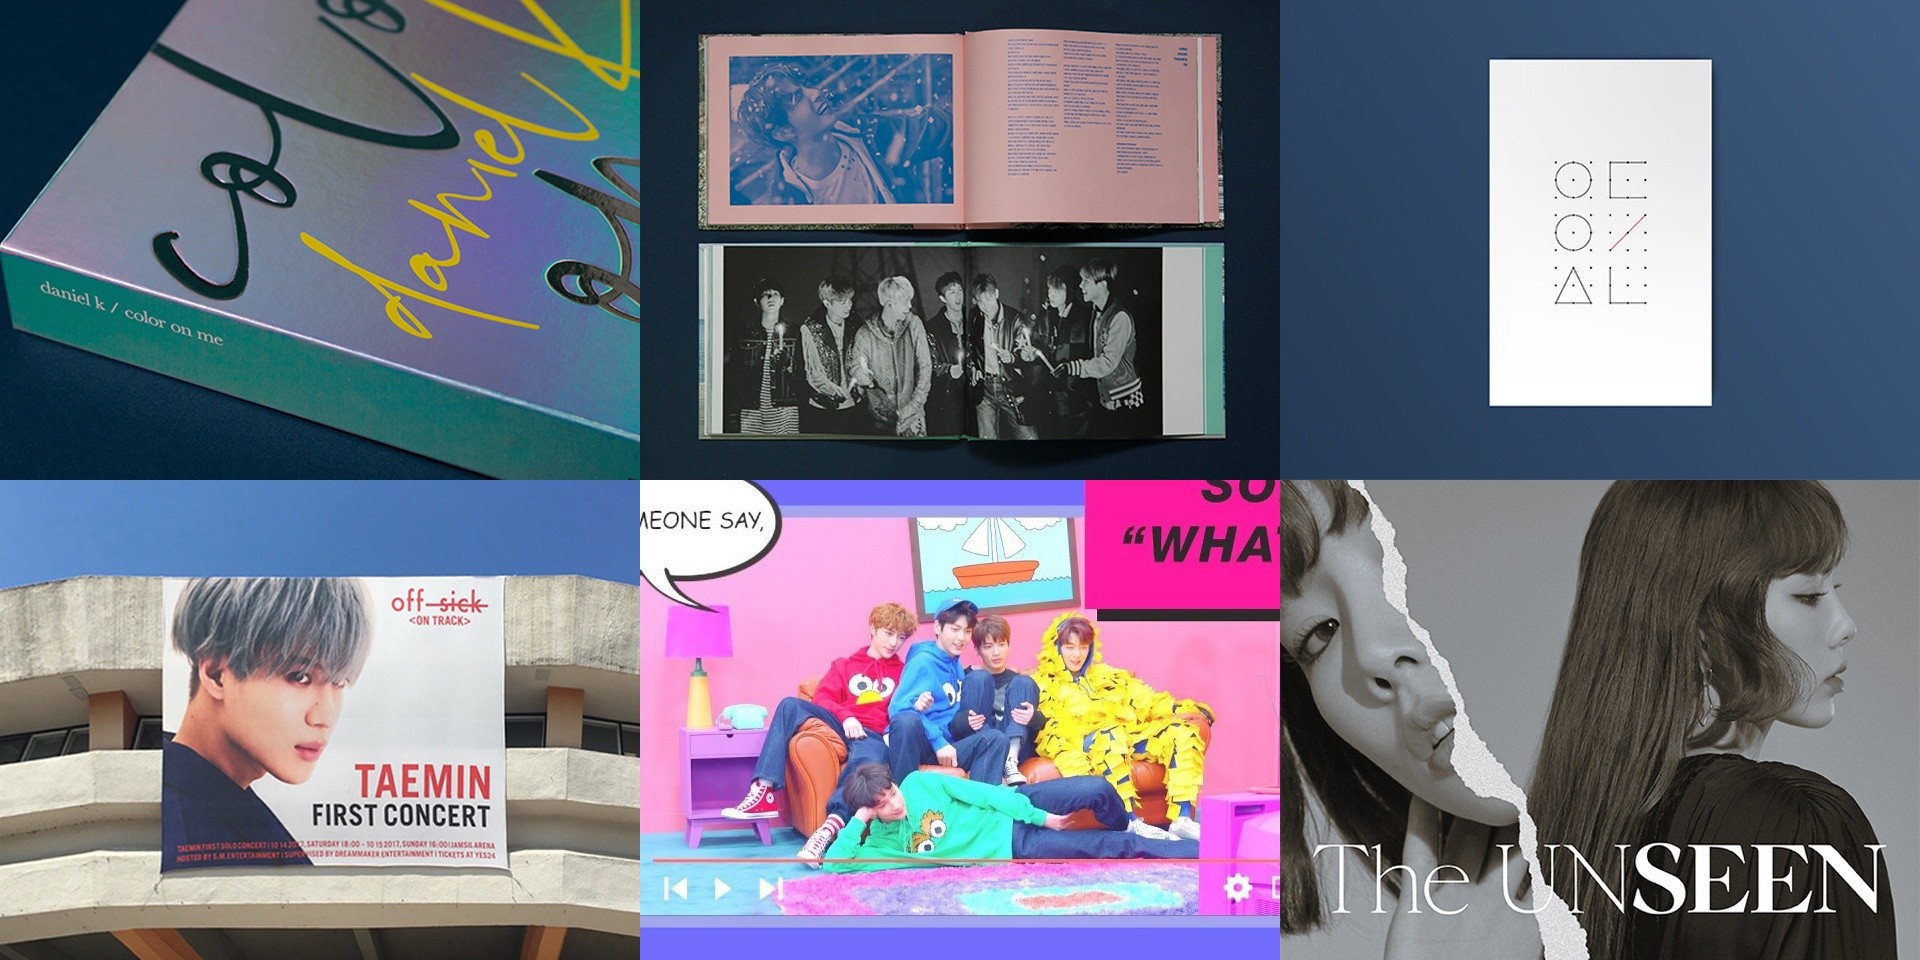 Jiyoon Lee of Studio XXX shares the processes behind 6 K-Pop albums and posters – BTS, Kang Daniel, LOONA, Taemin, TXT, and Taeyeon